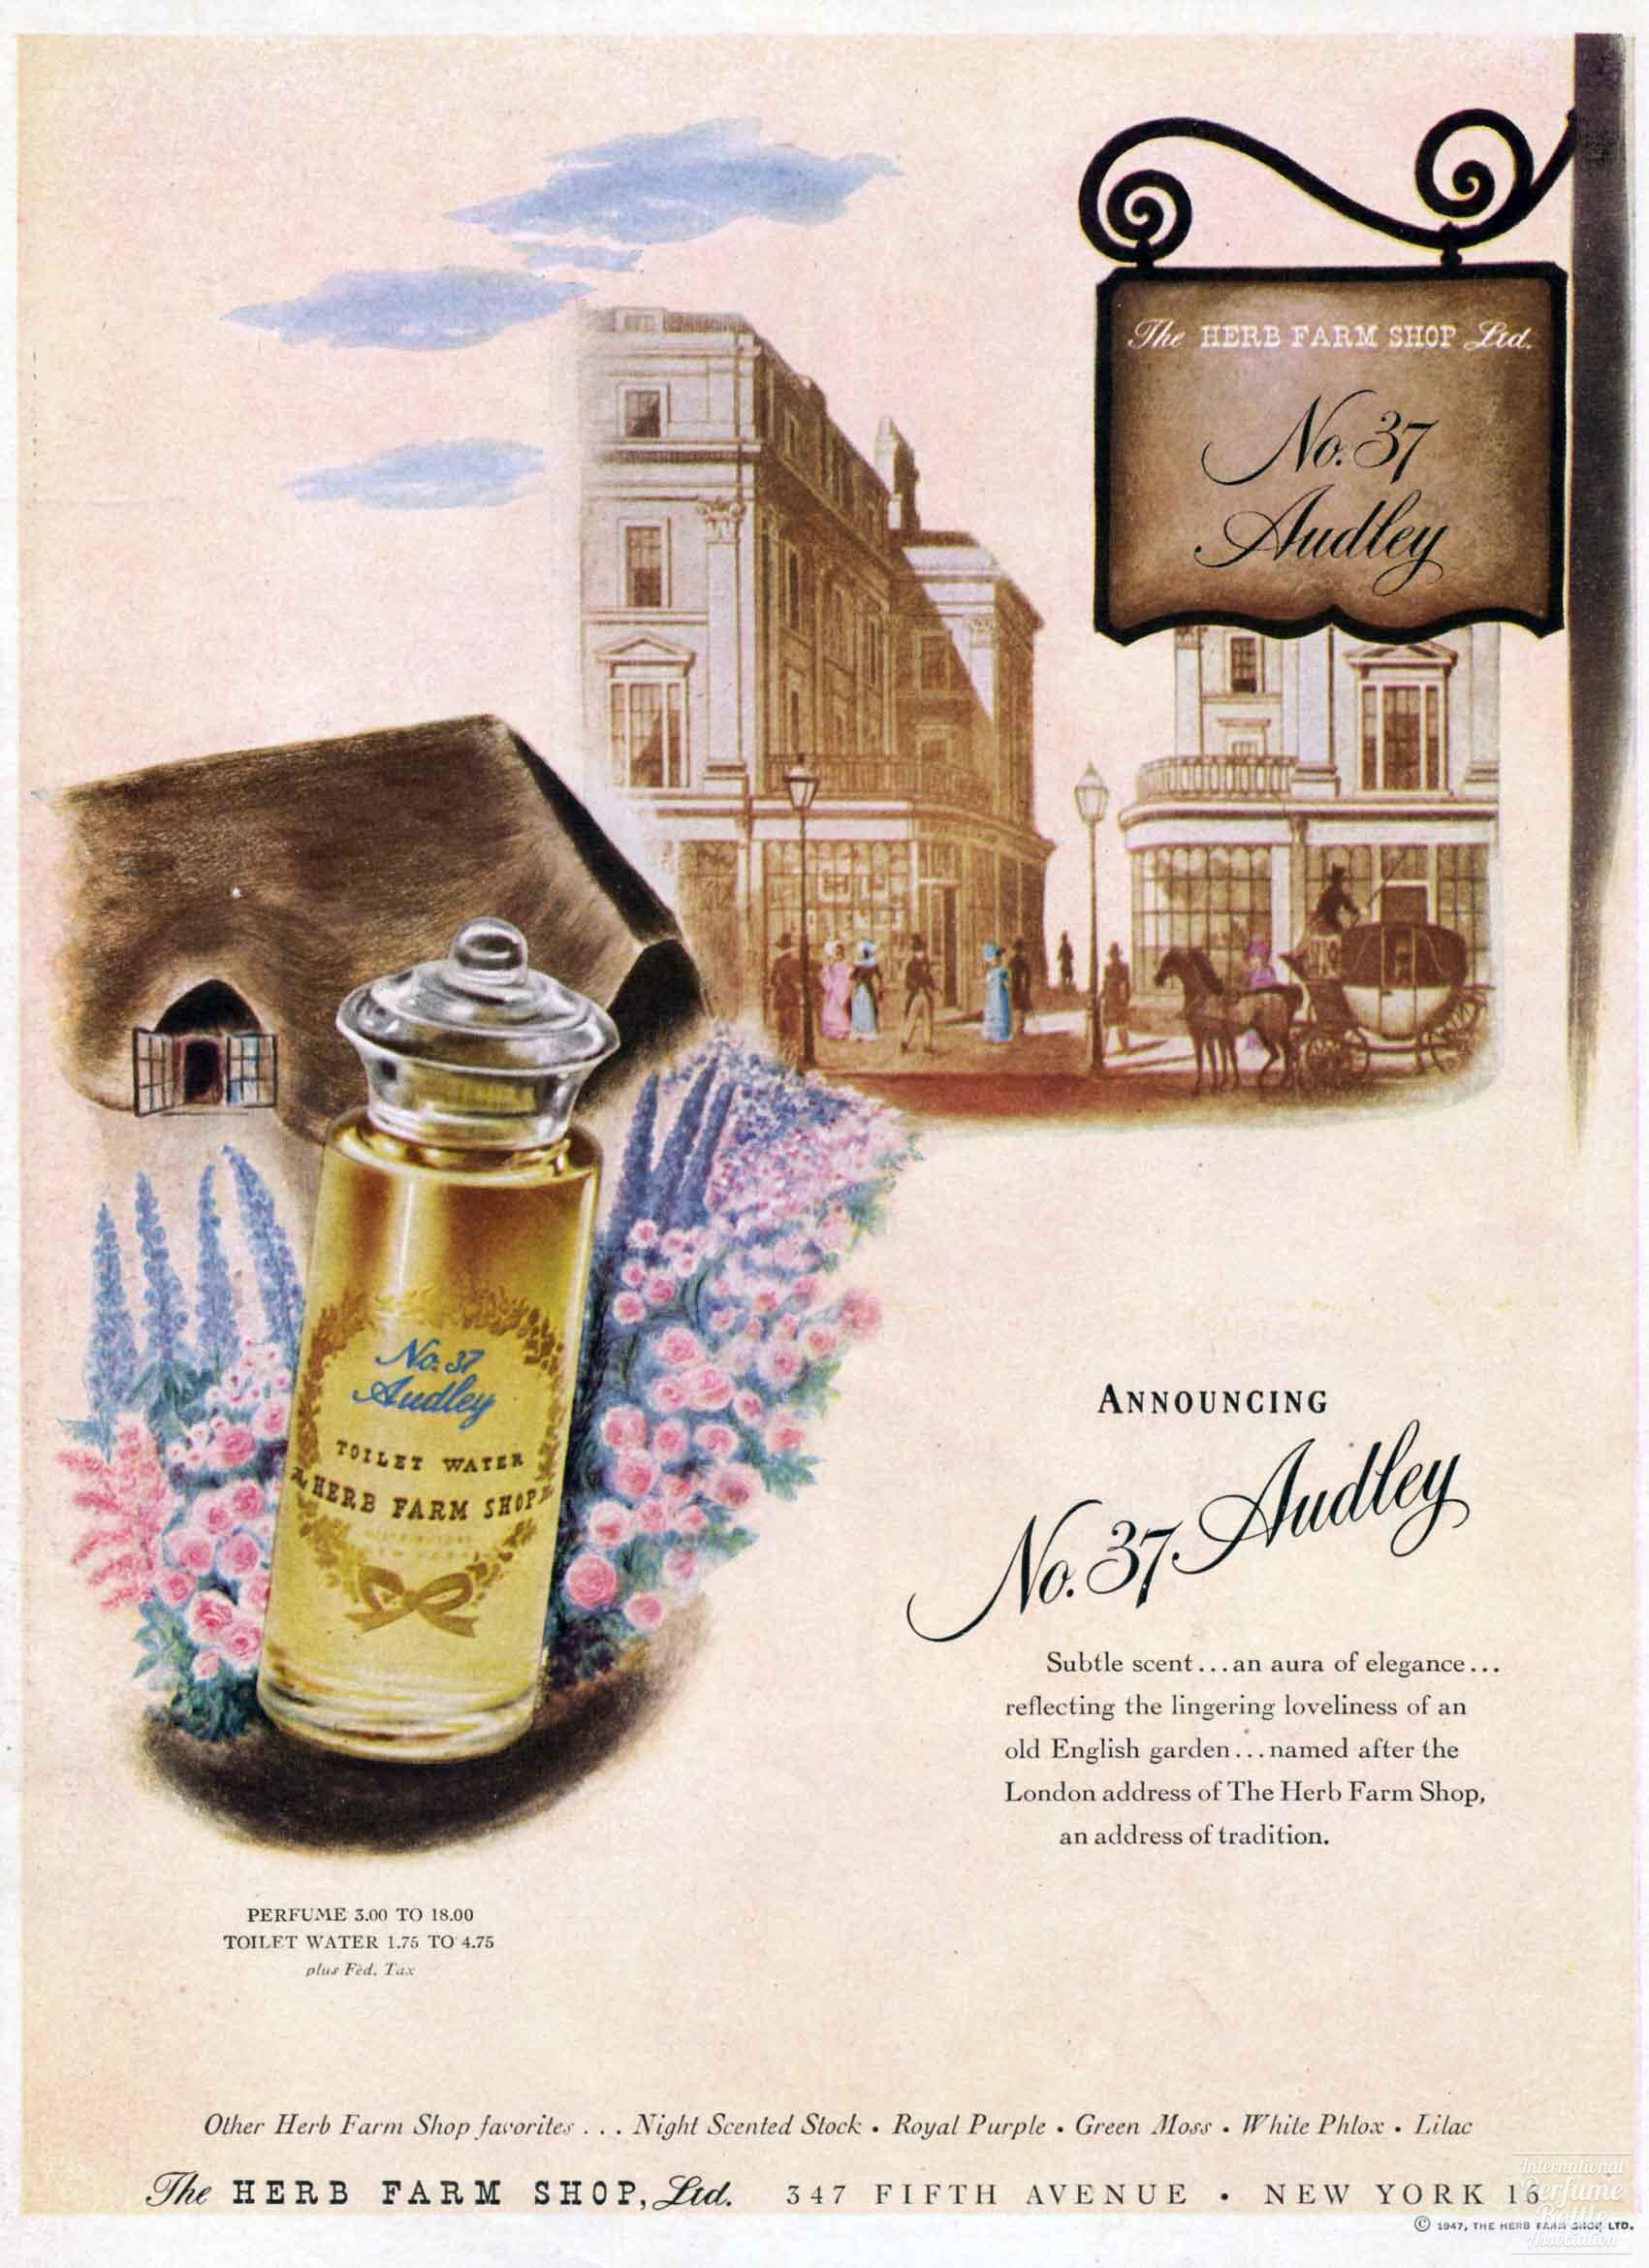 "No. 37 Audley" by The Herb Farm Shop Ltd. Ad - 1947